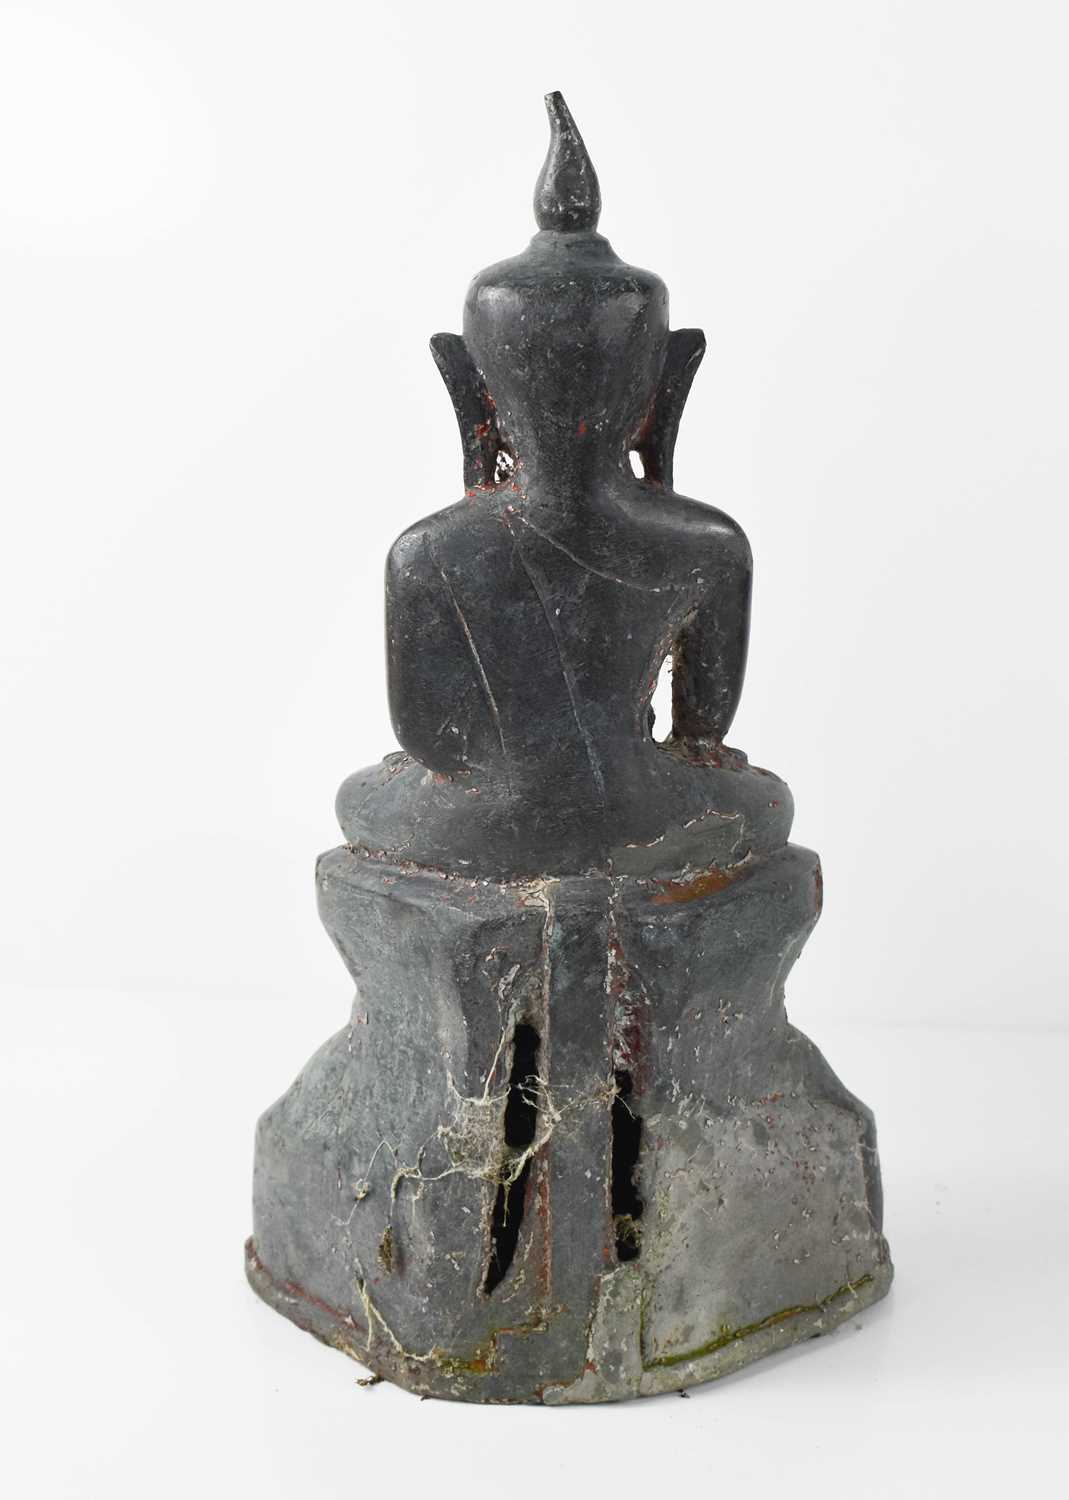 A bronze statue of the Buddha in Bhumisparsha Mudra pose, with serene face, sat cross legged on a - Image 2 of 2